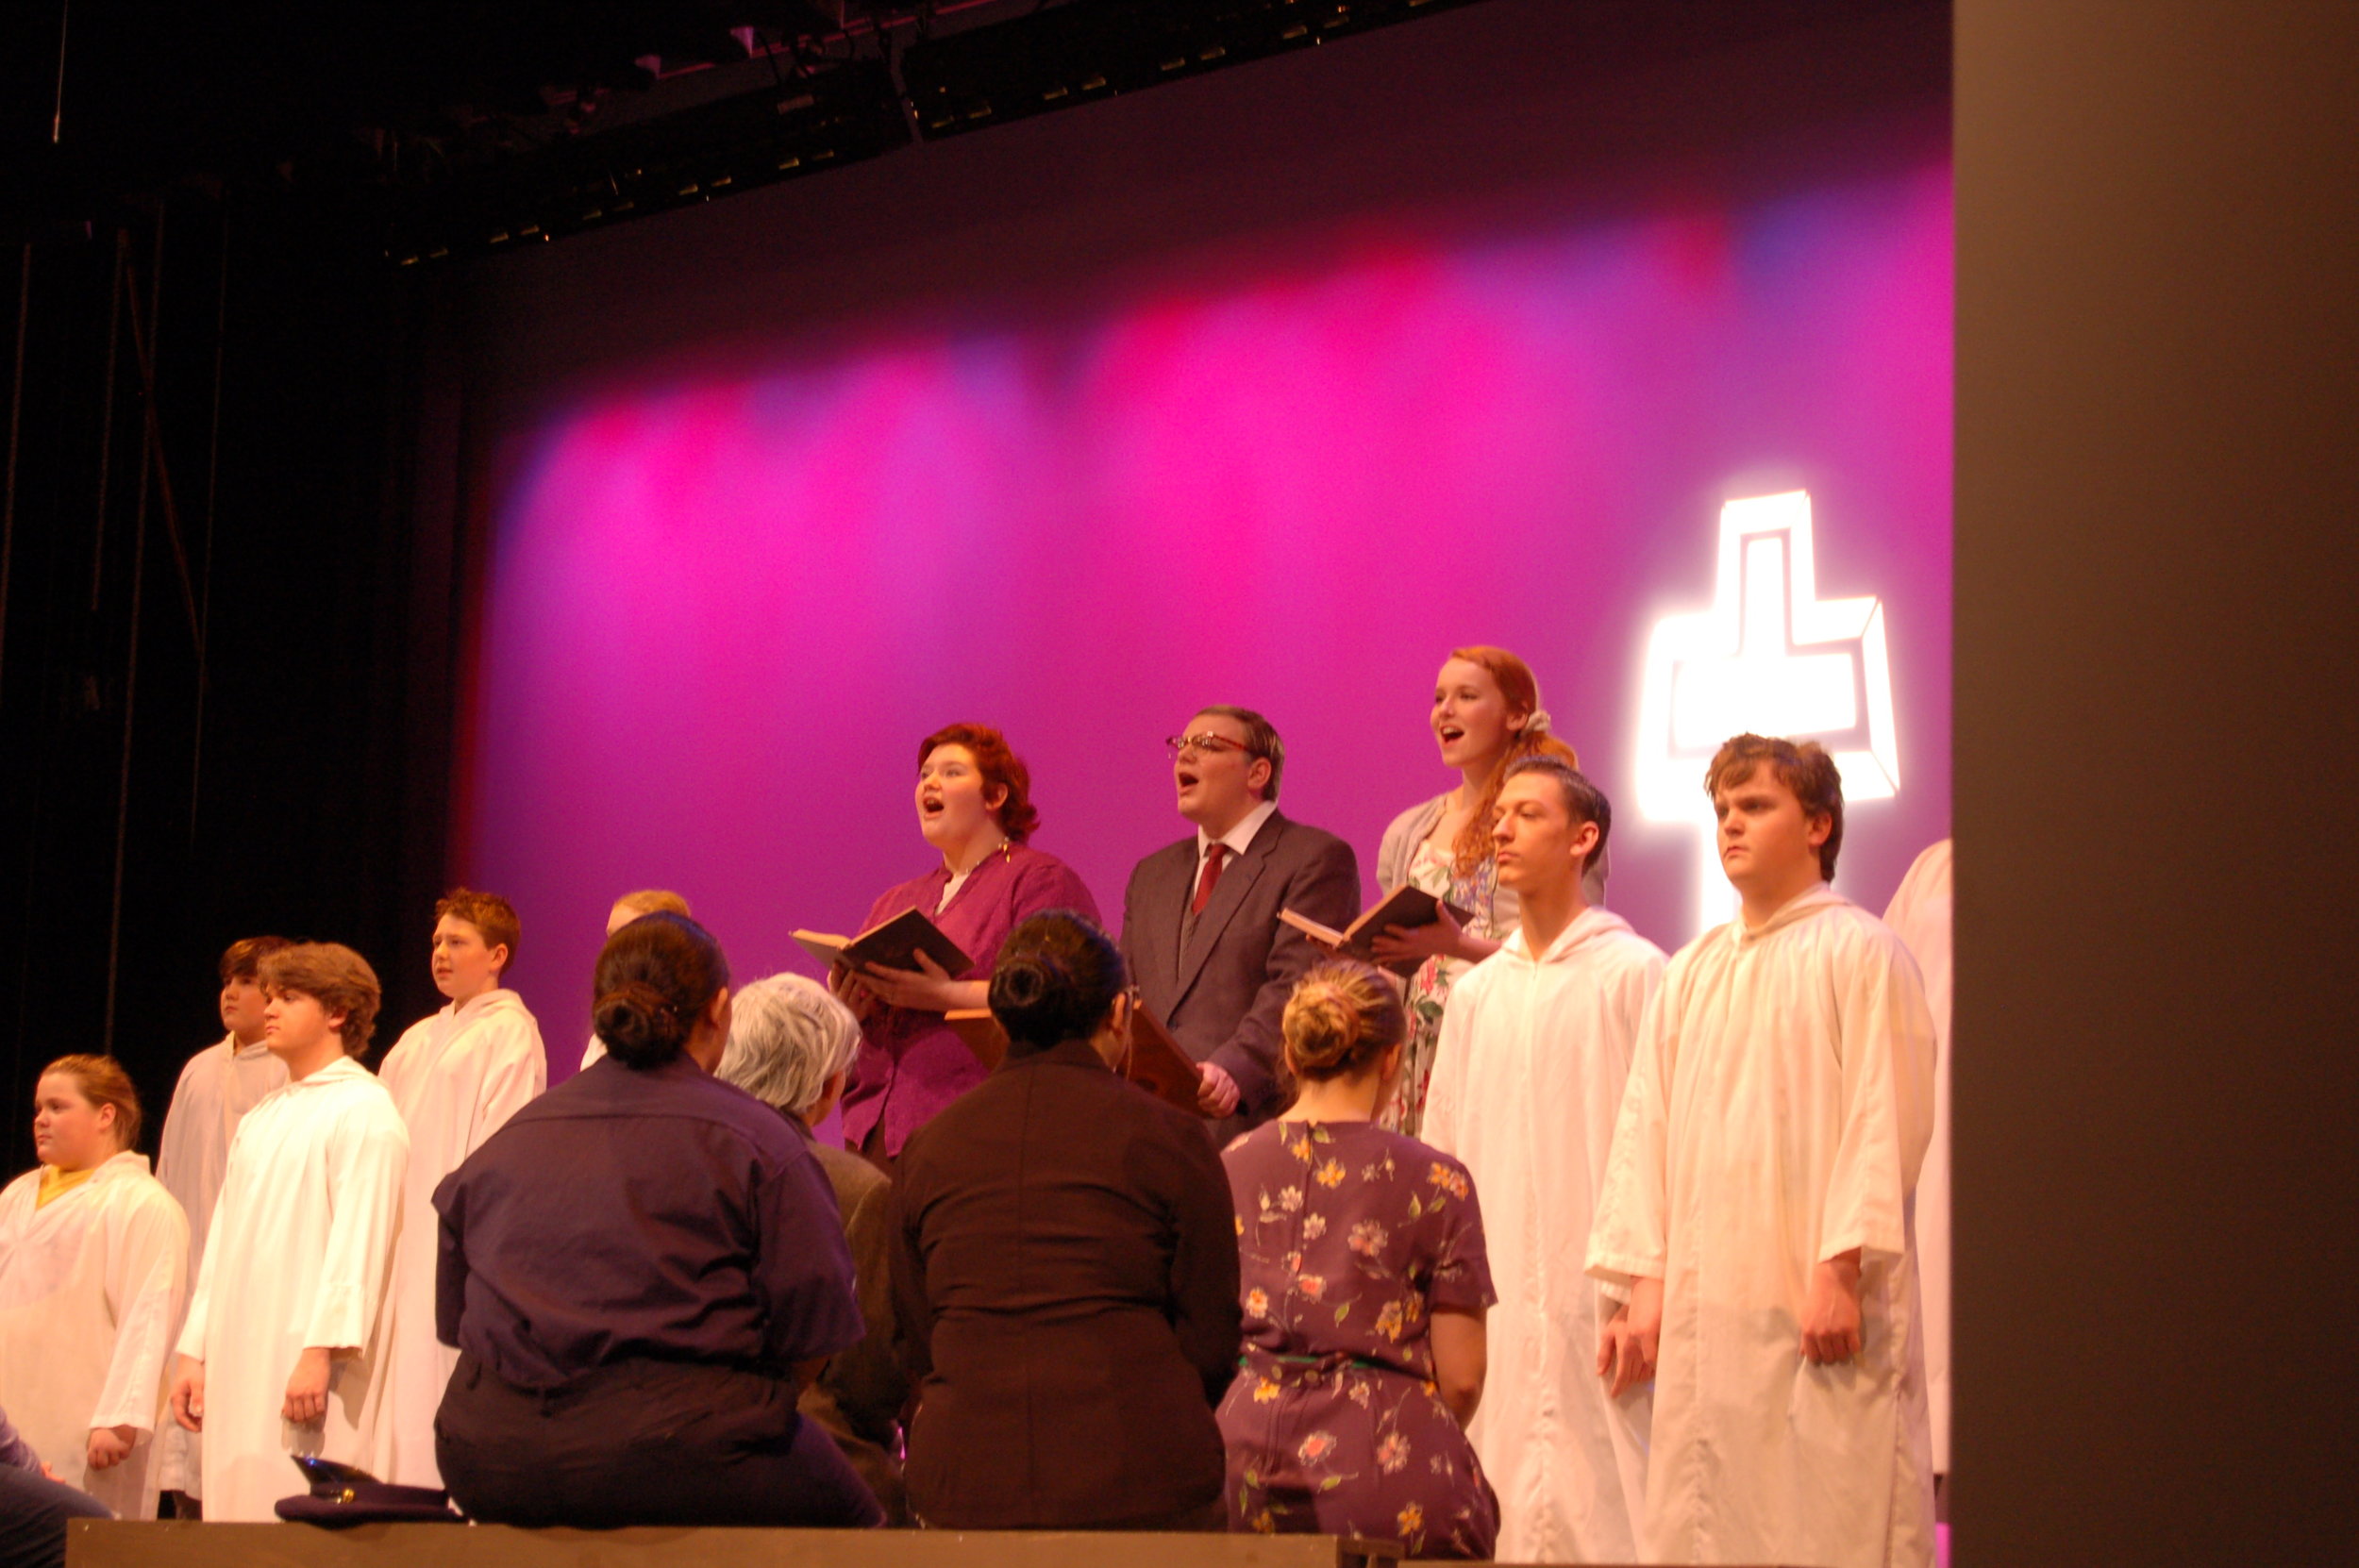   The alter “boys” from left, Shae Arsenault, Garrett Dewyea, Bryce Davison, Cody Auclair, Jayce Clement and Lowden Pratt.    Faced away, from left, Emily Roberts, Olivia Ellis, Karen Bujold and Caitlynn Flemming. And in mid-song from left, Sadie Joh